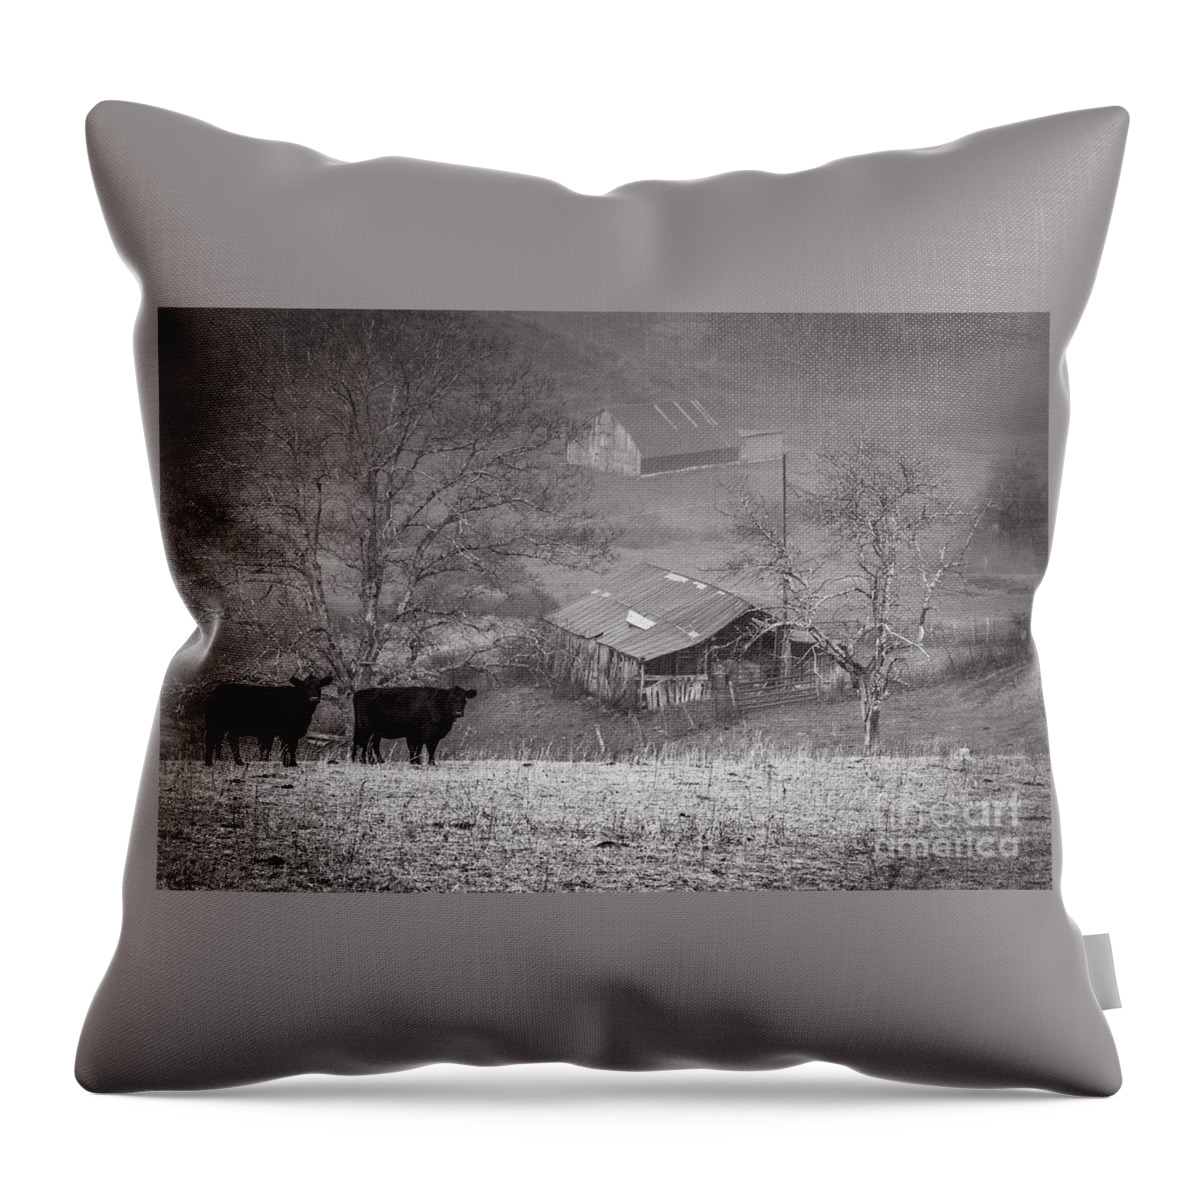 Pasture Field Throw Pillow featuring the photograph Pasture Field and Barns by Thomas R Fletcher